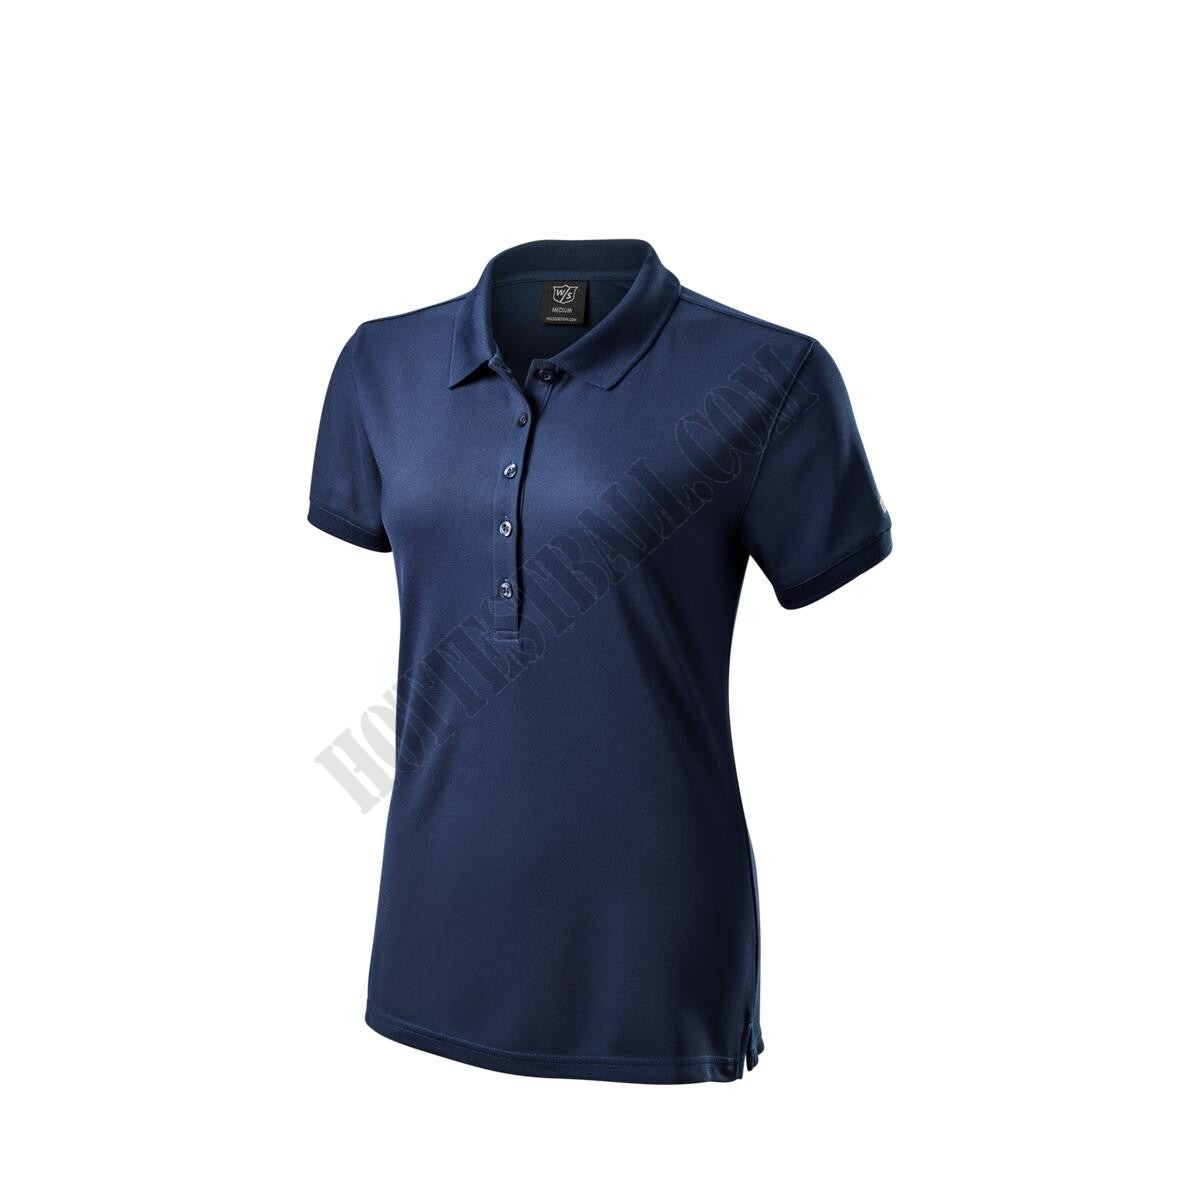 Women's Authentic Polo Shirt - Wilson Discount Store - -0